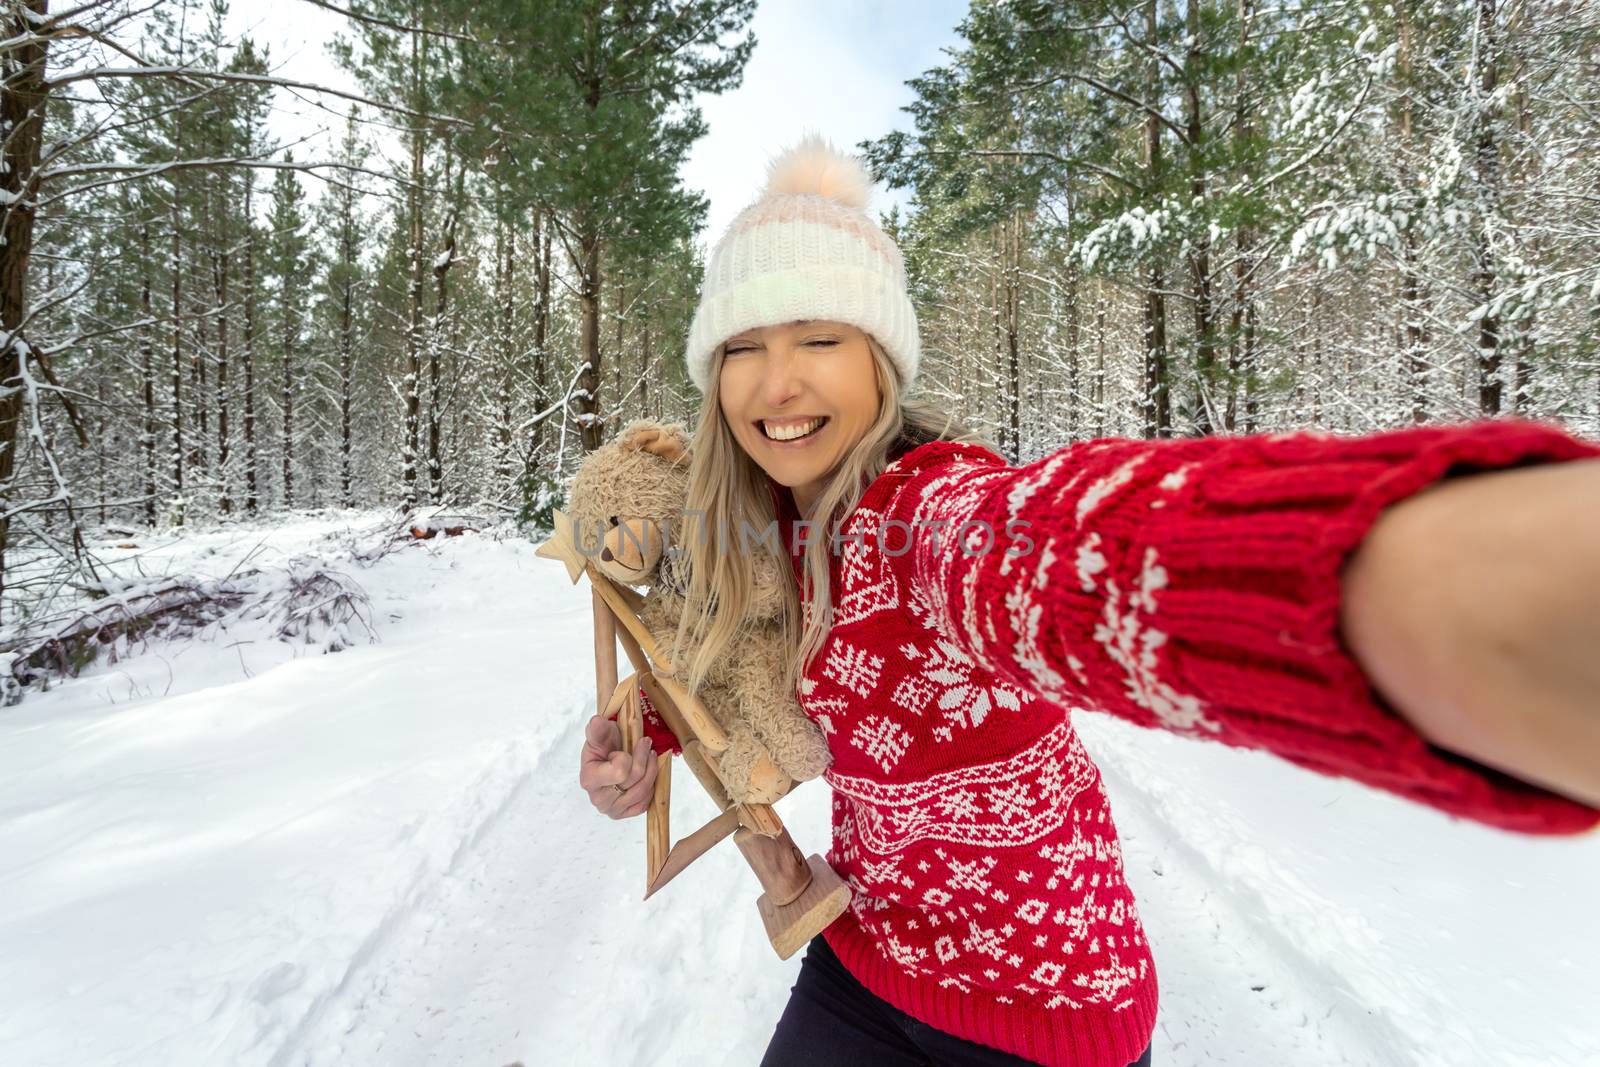 Cheerful girl takes a selfie among the tall snow covered pines Christmas